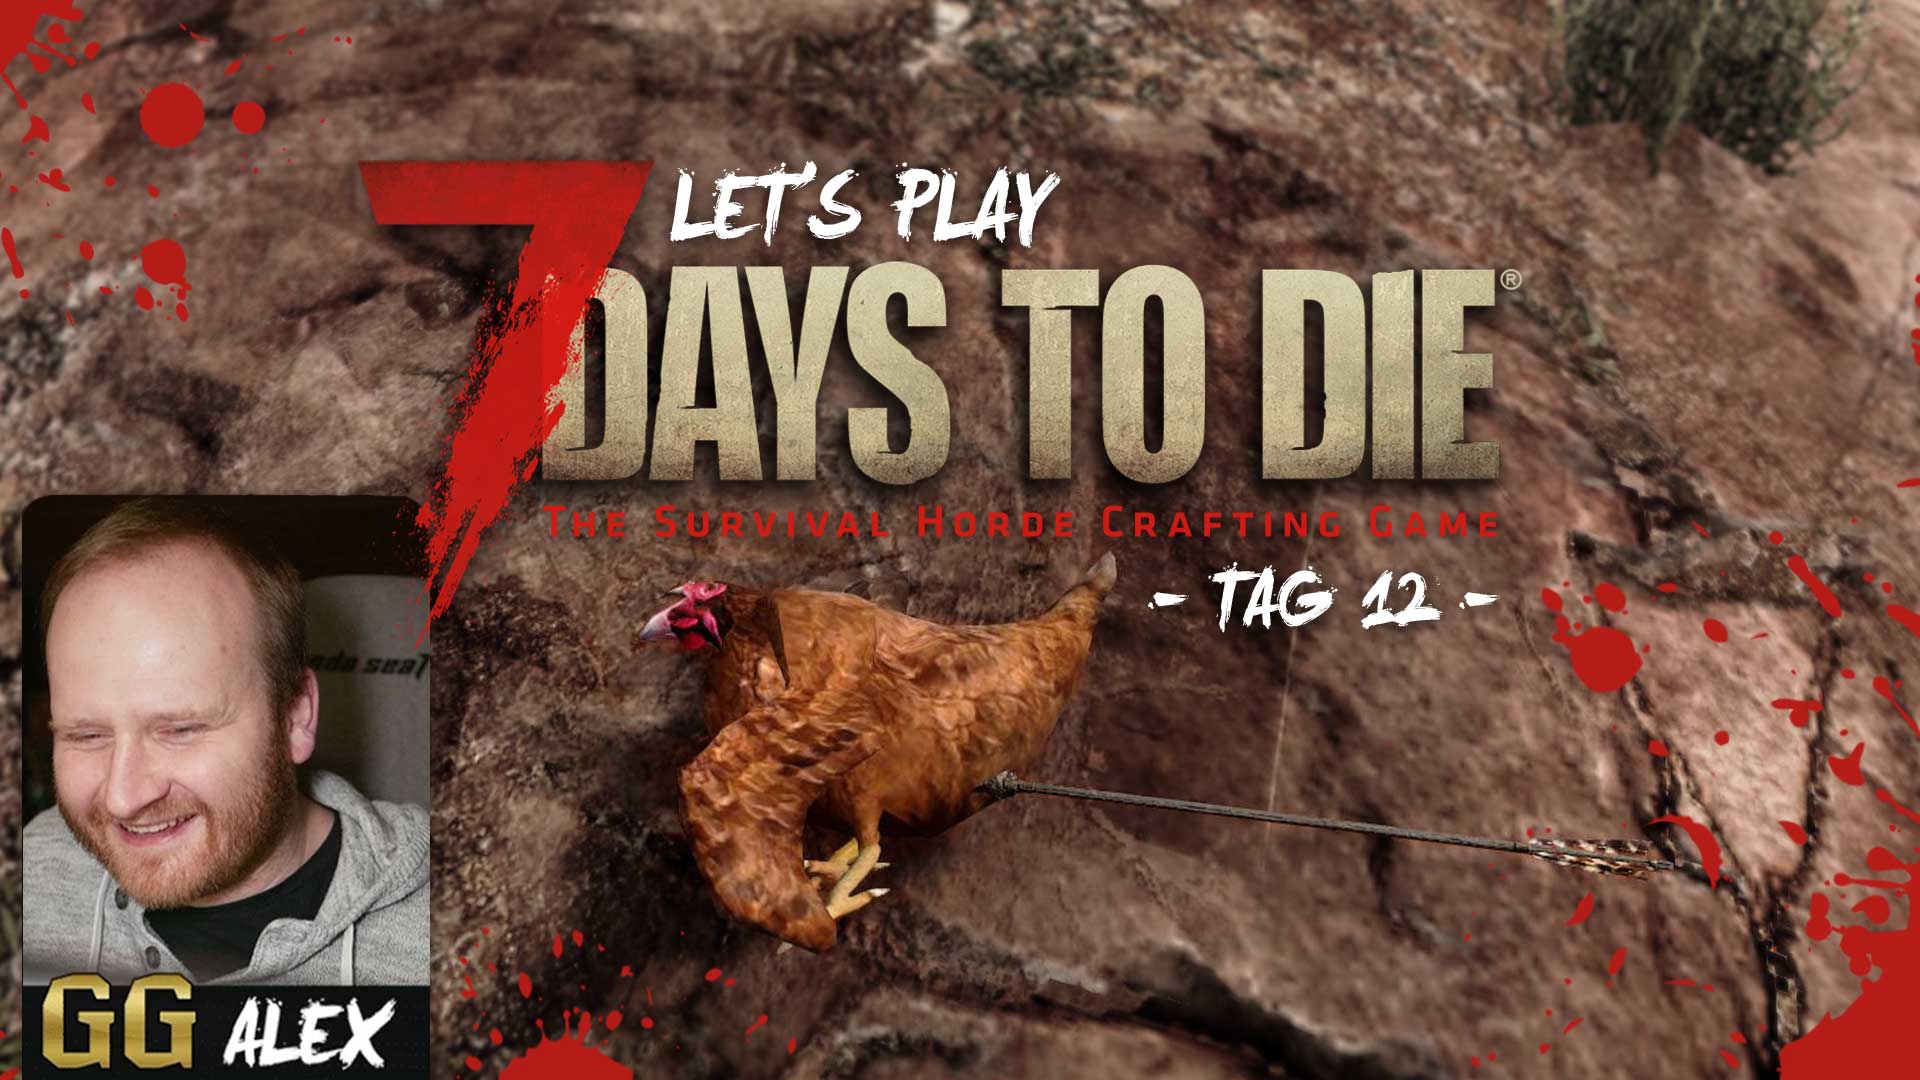 lets play 7 days to die tag 12 GG